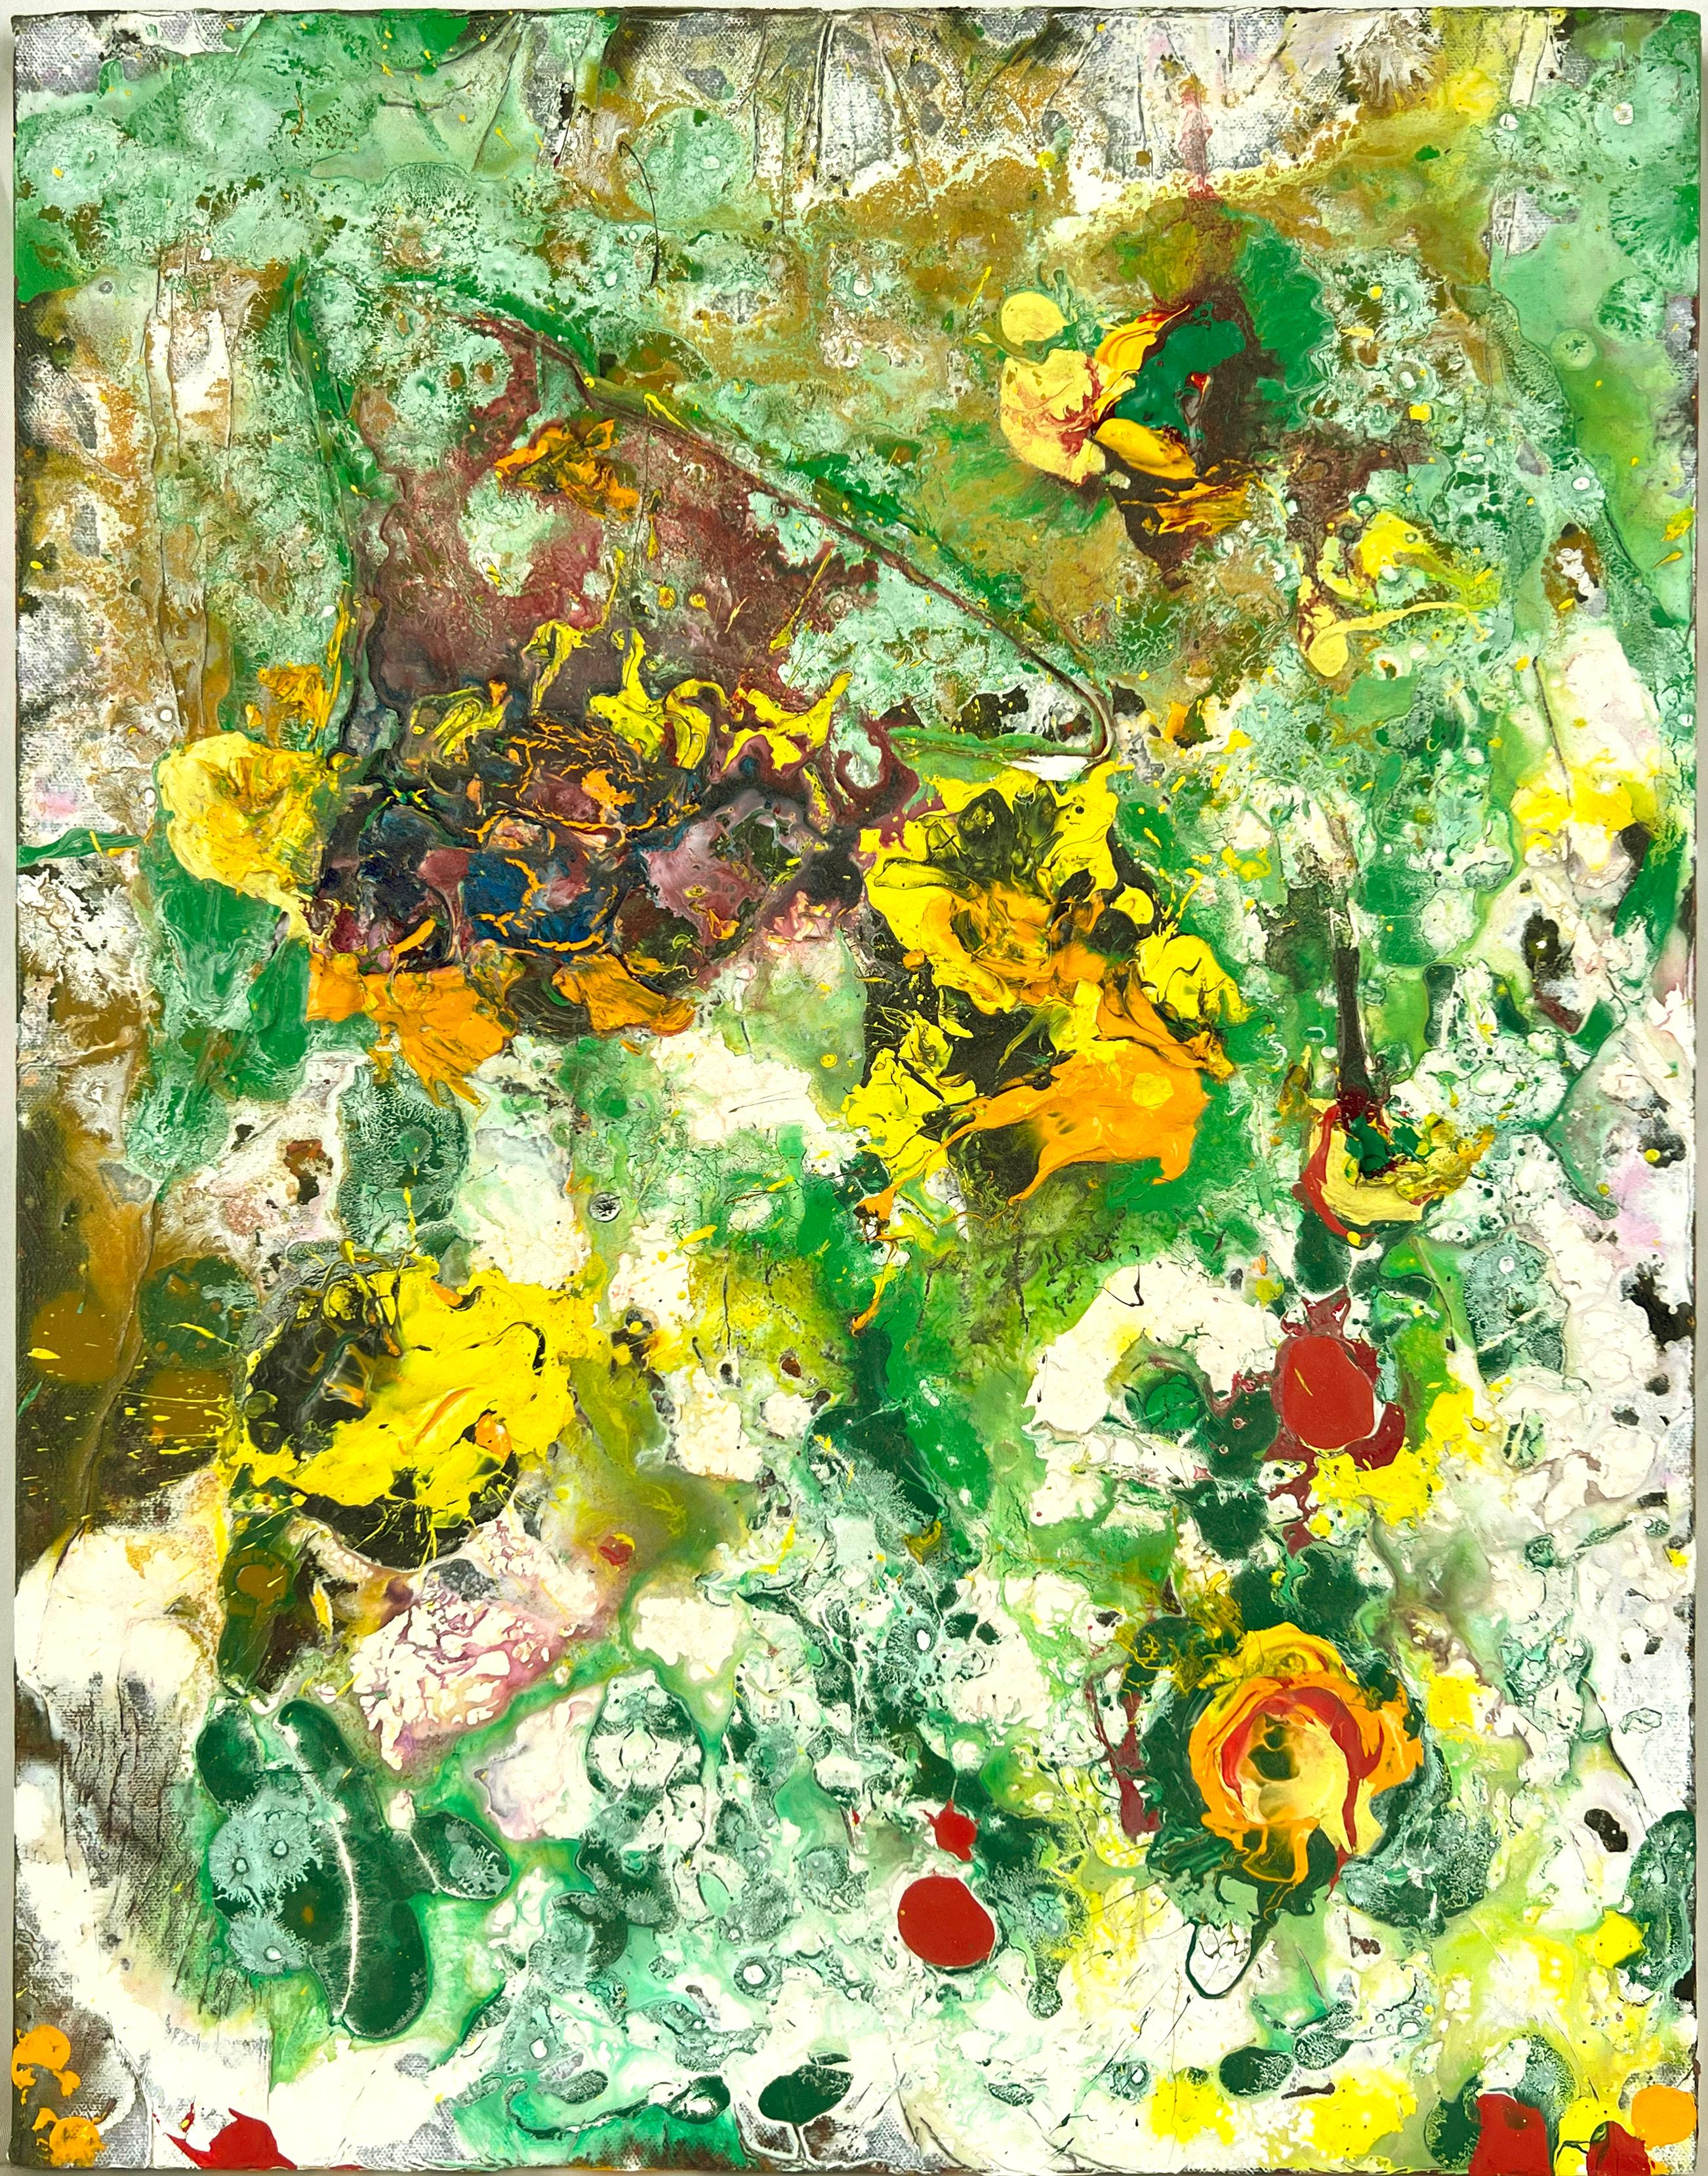 Charles David Francis Landscape Painting - "Garden Series in a Dream" - Abstract Expressionist Acrylic on Canvas